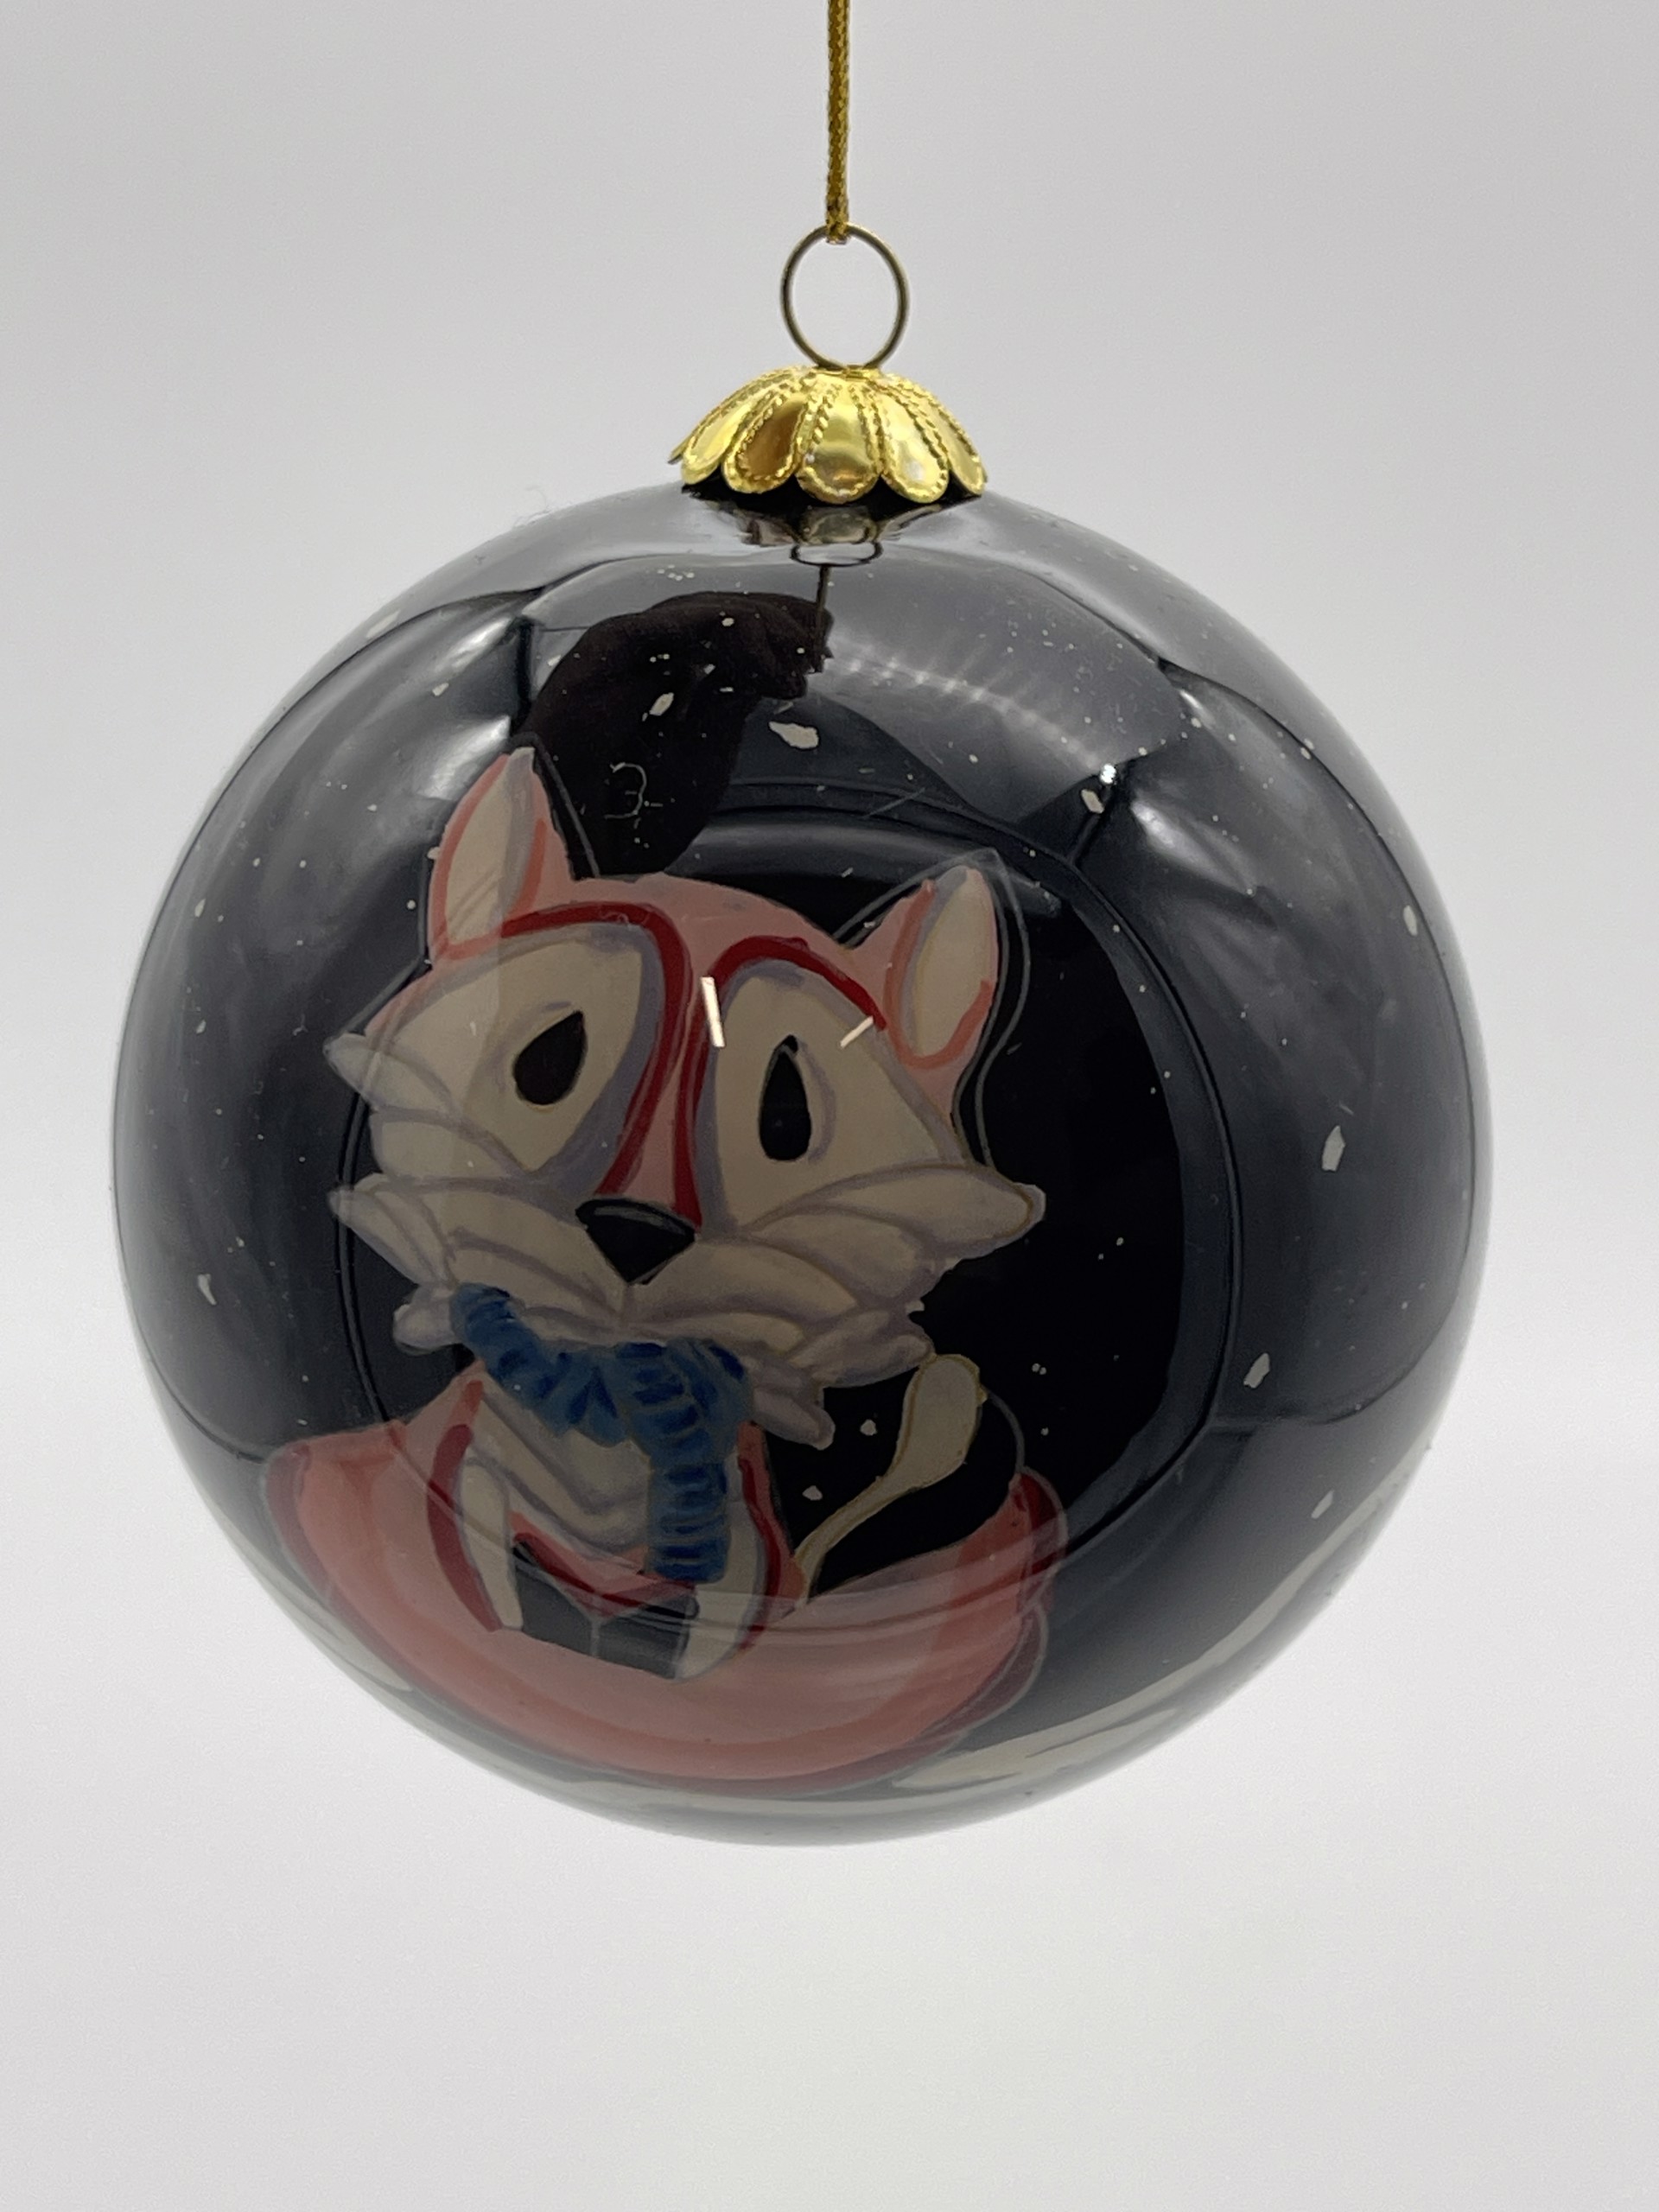 Chester the Fox Ornament’ by Robbie Craig